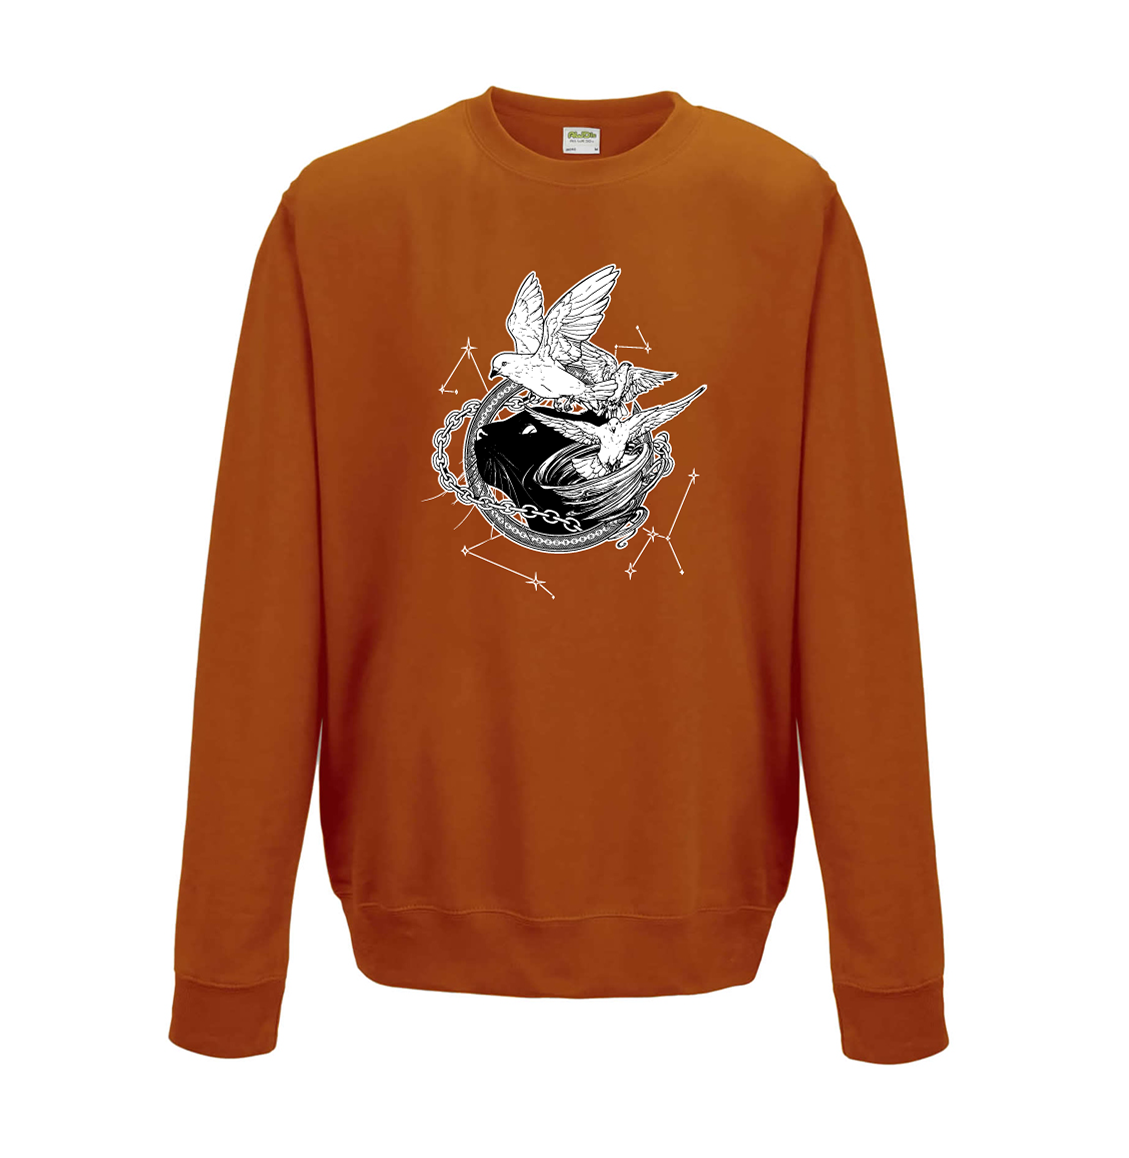 Orange sweatshirt with white illustration of Dustspinners, constellations, and chains swirling around Faithful the cat